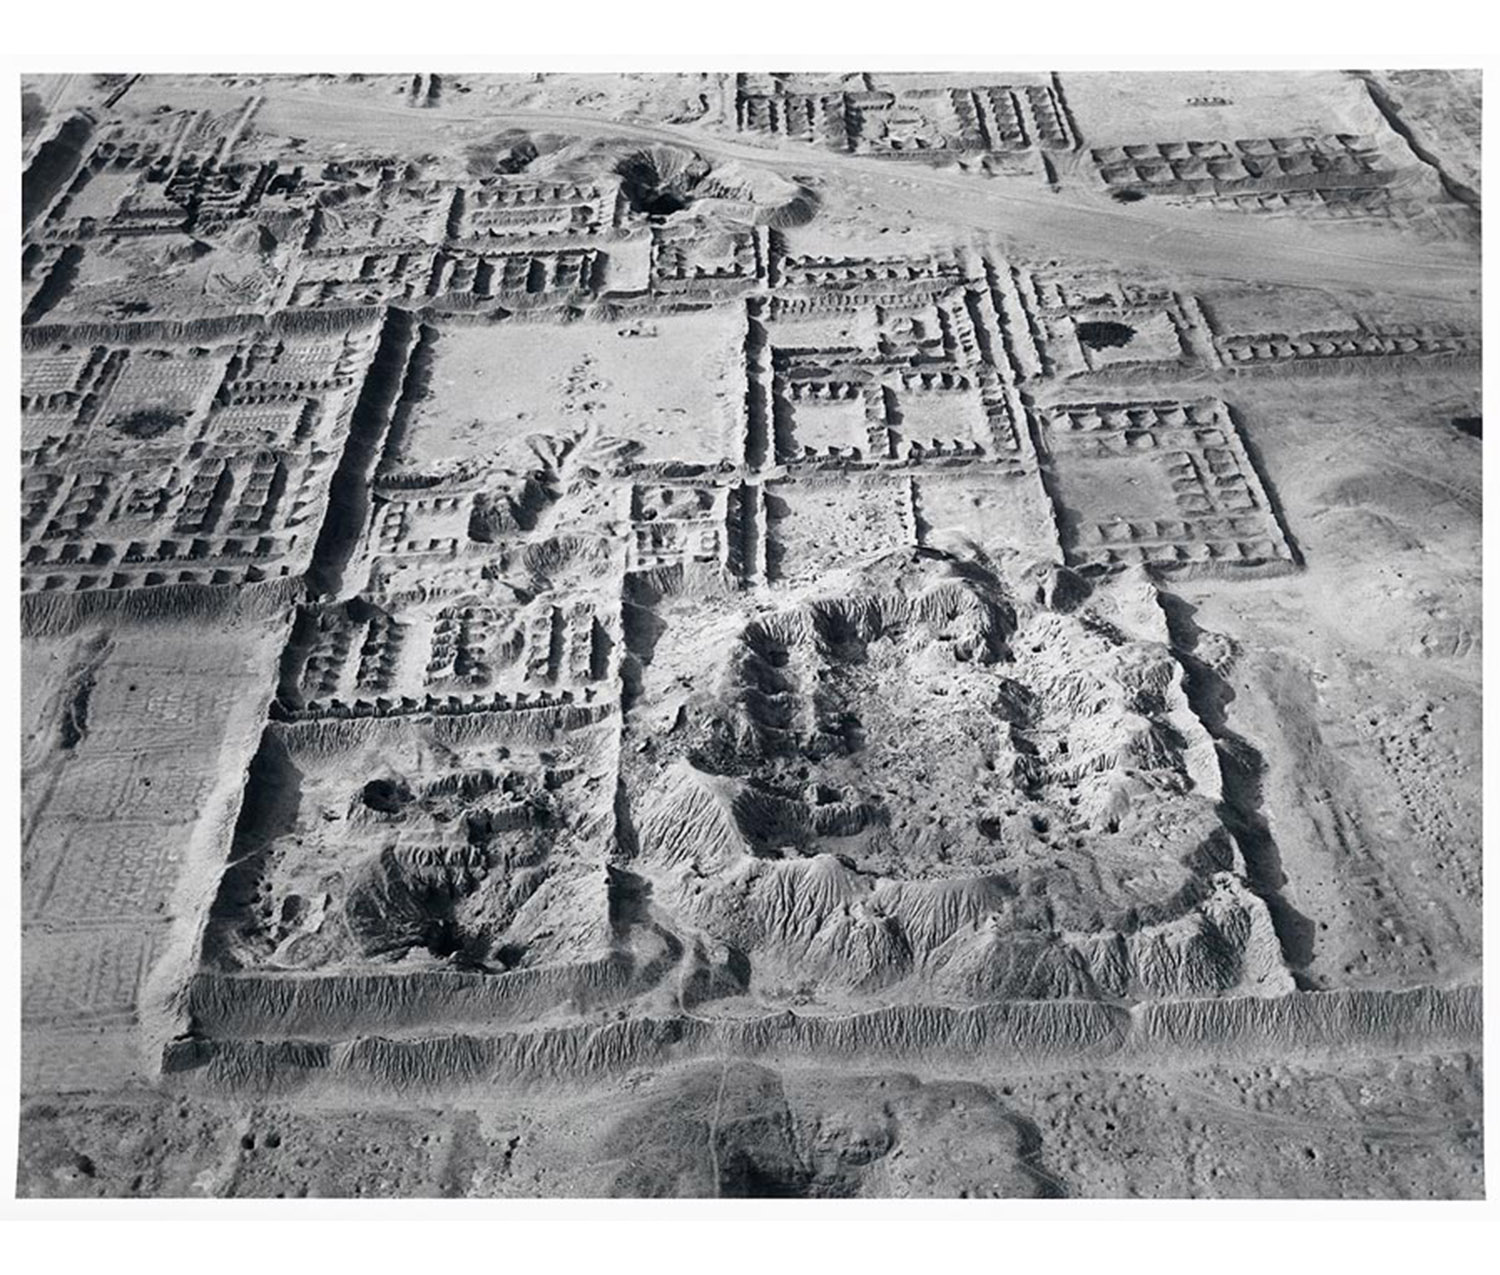 aerial view of sandy area with low dirt mounds and rectangles of ruined buildings